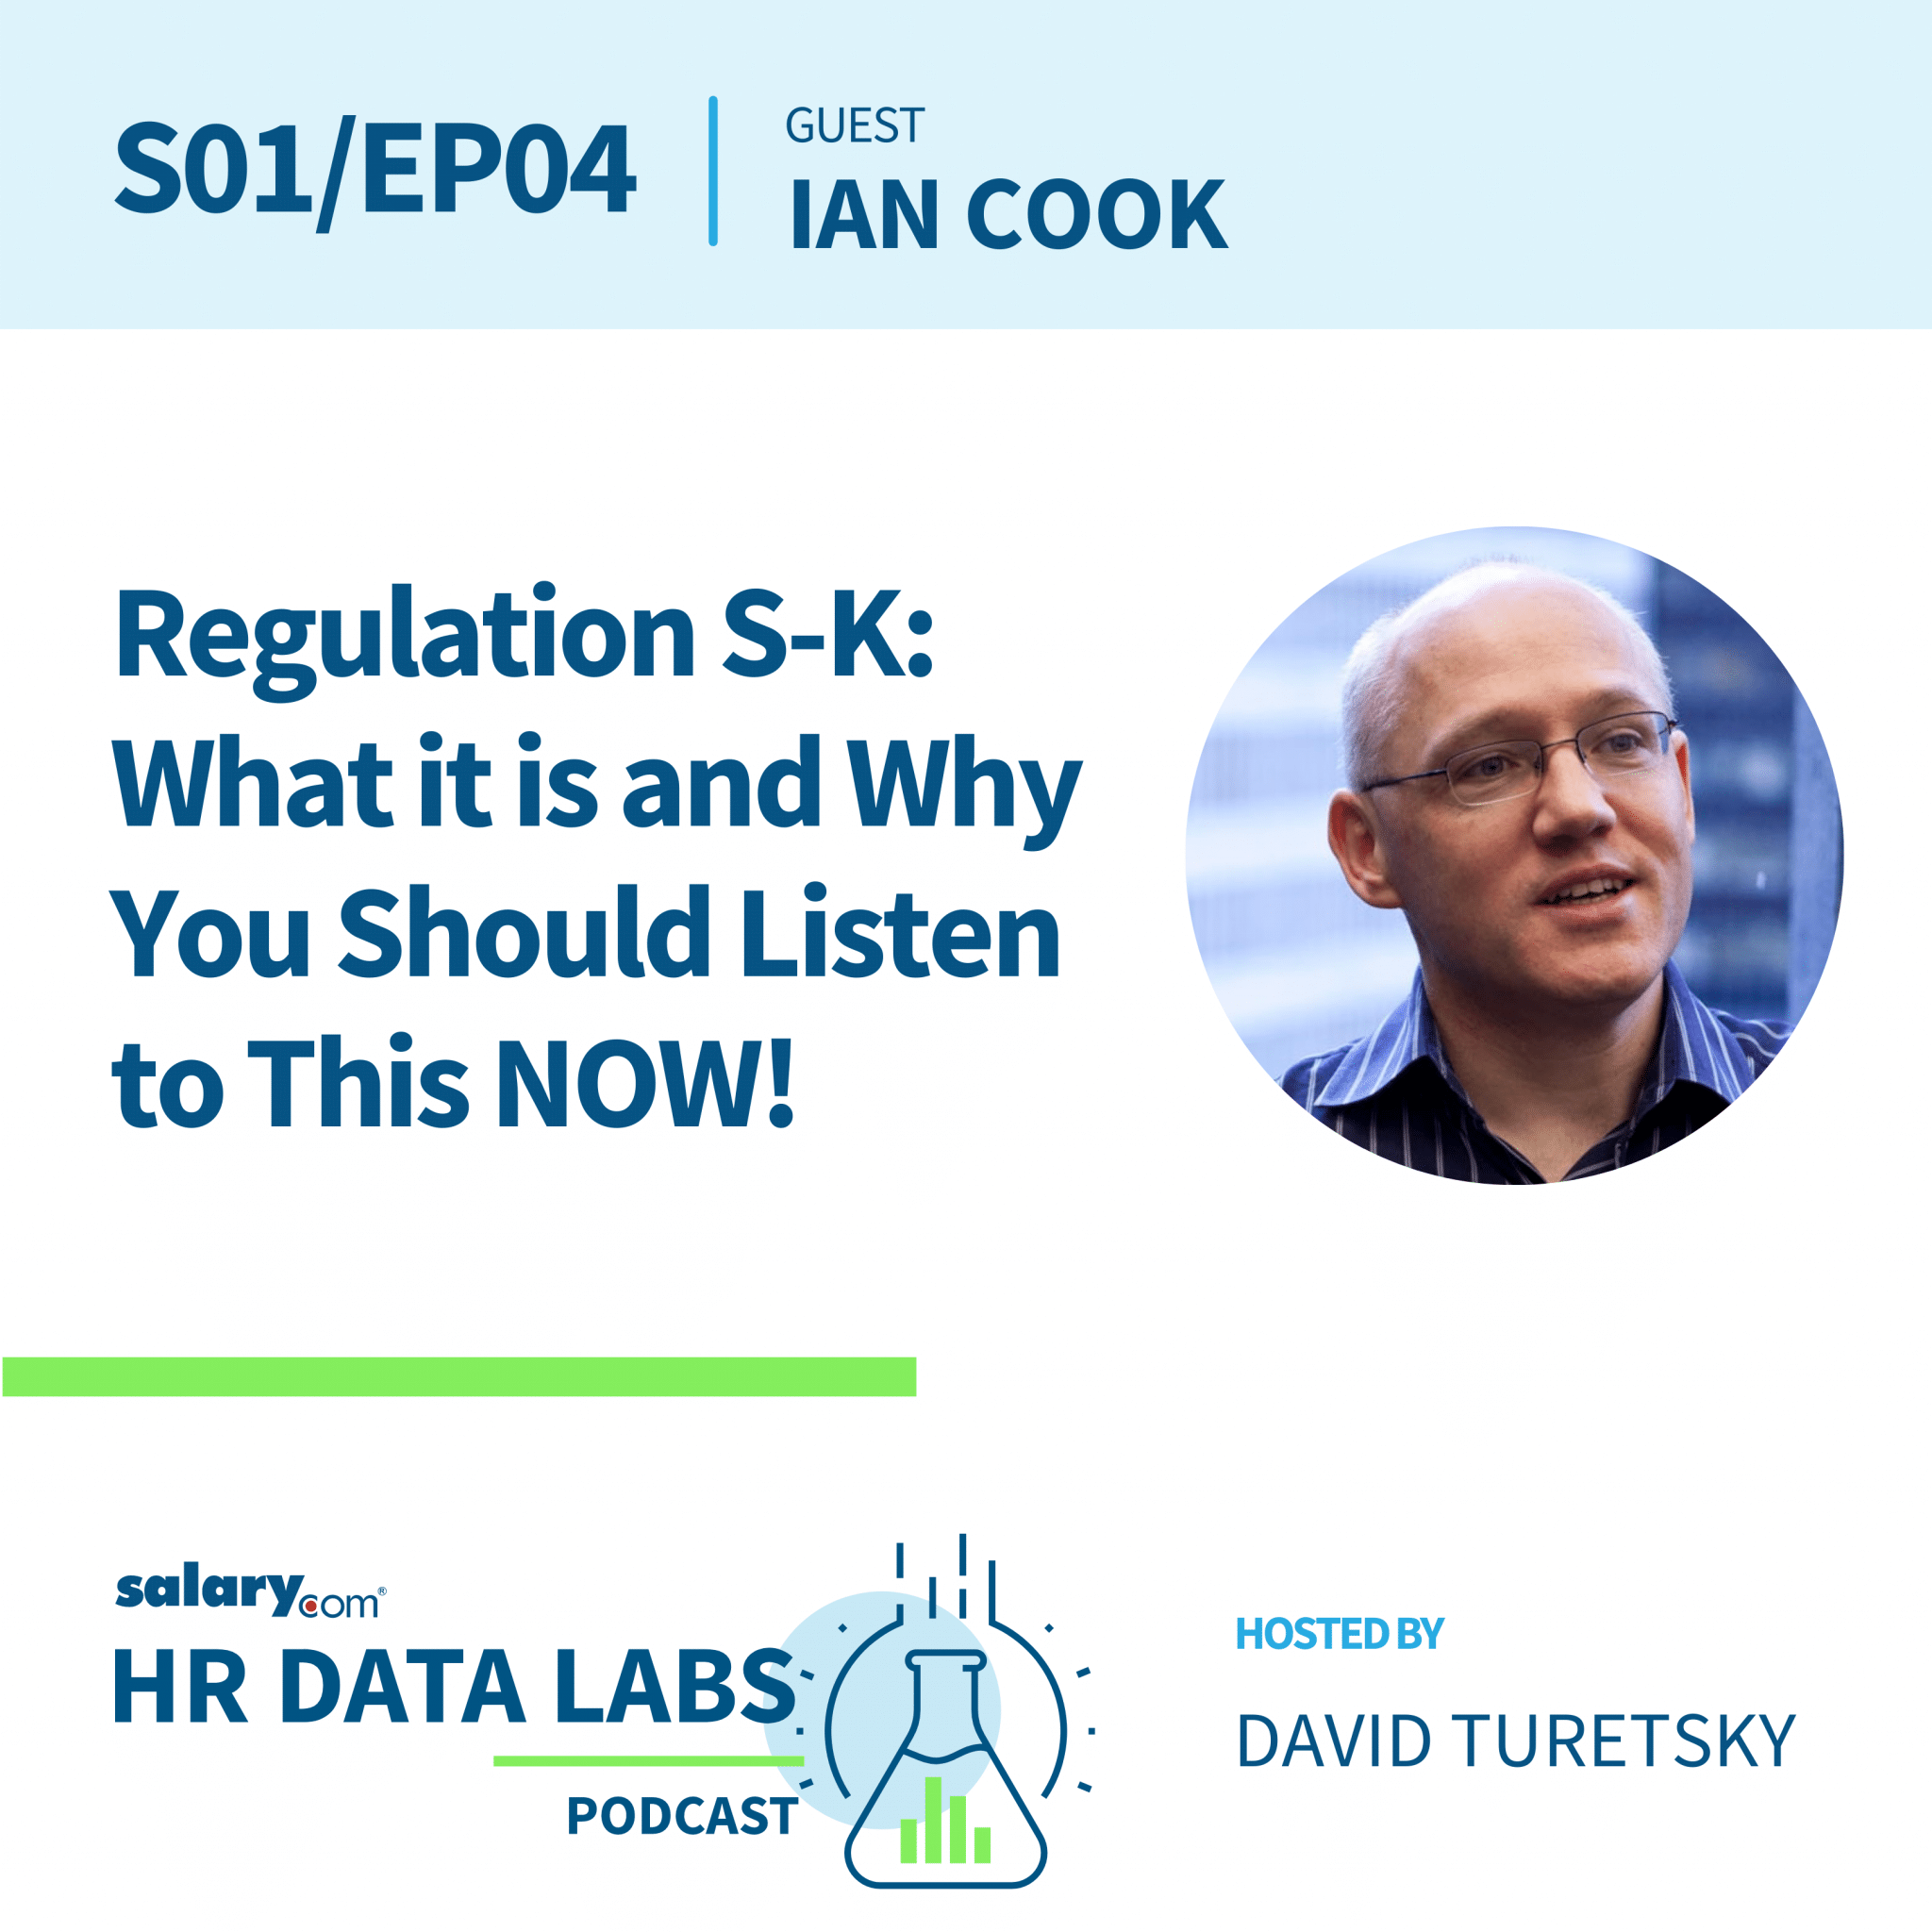 Regulation S-K: What it is and Why you should listen to this NOW!